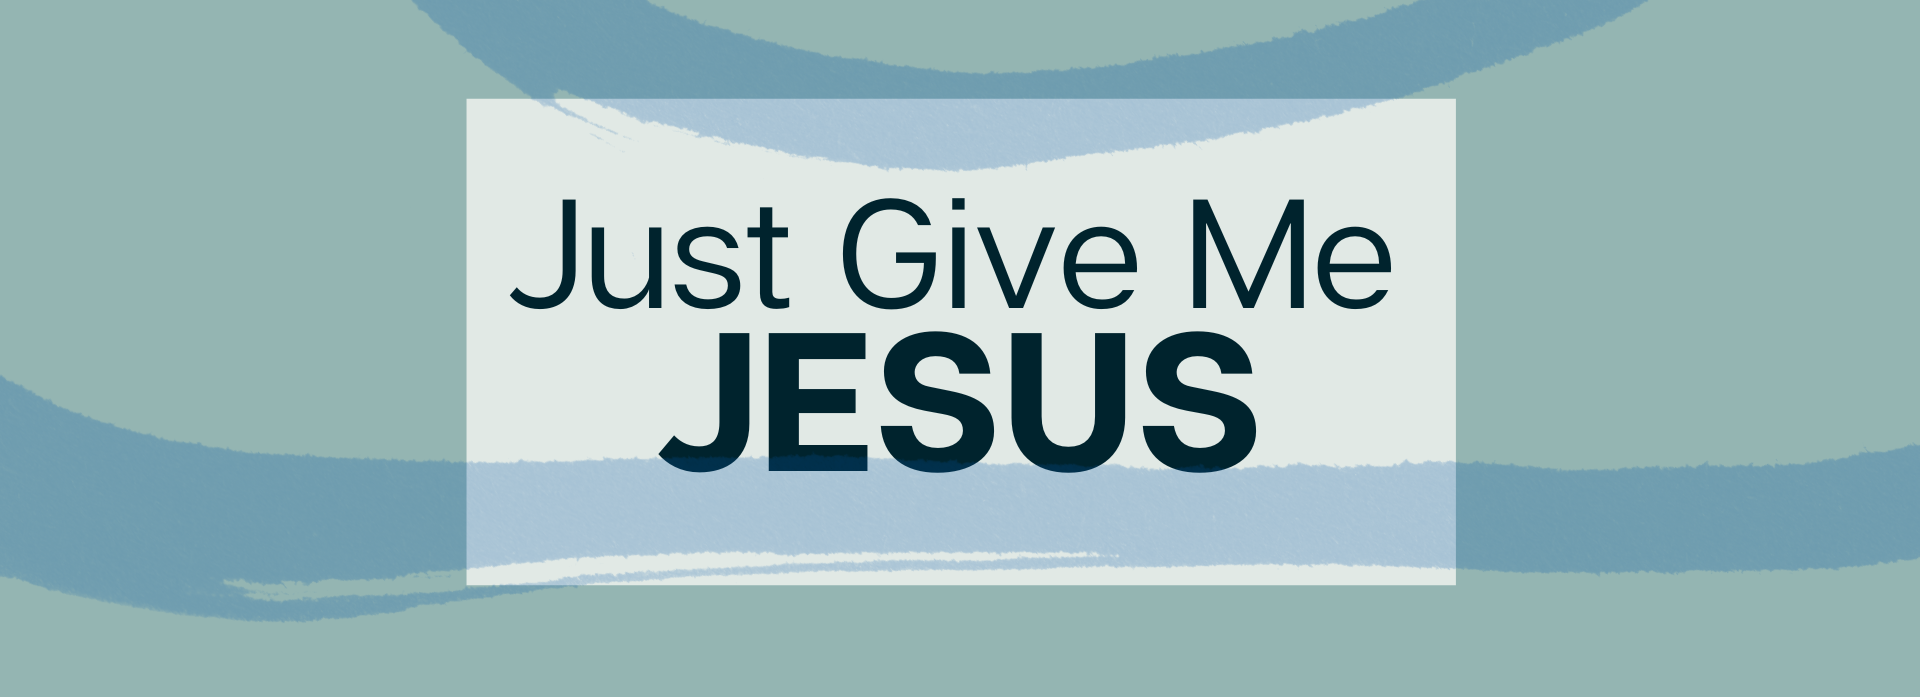 Just Give Me Jesus | Christ Bible Church of Chicago